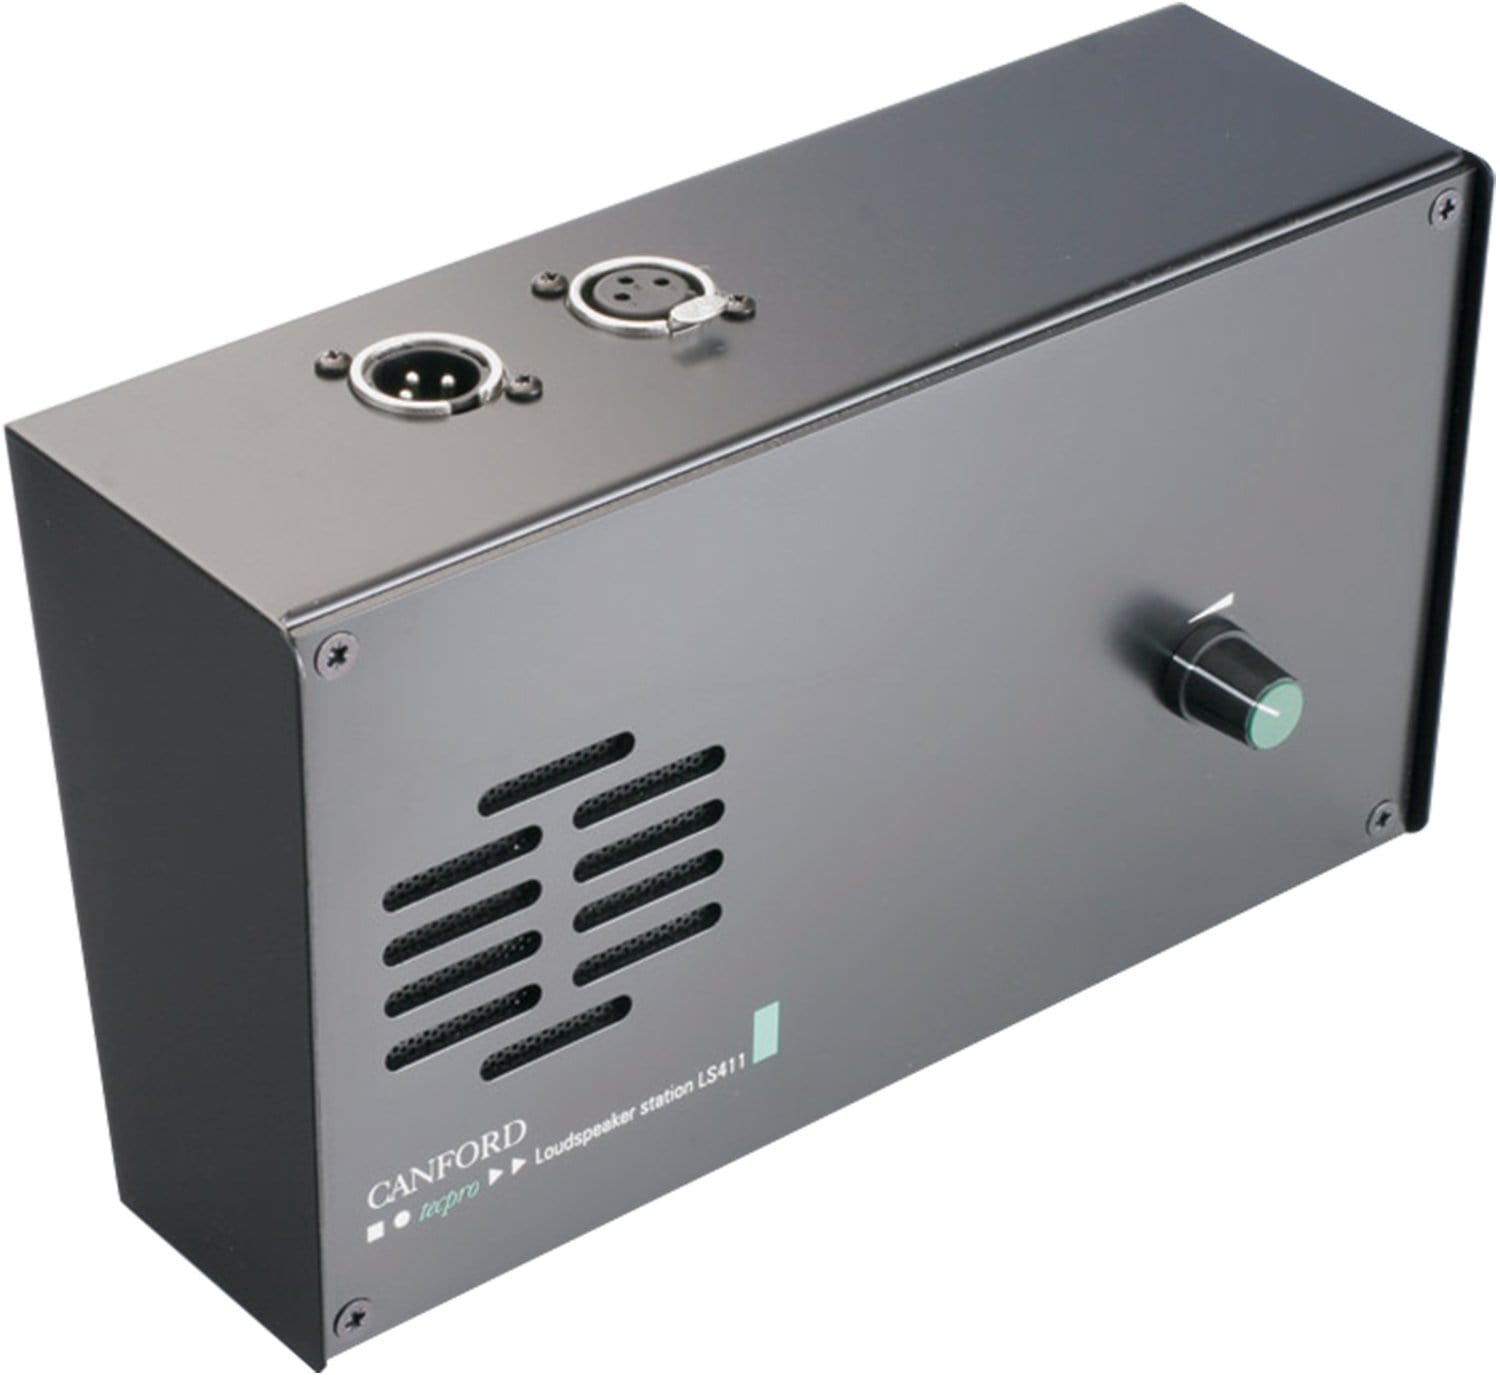 Technical Projects LS411 Intercom Loudspeaker Station - ProSound and Stage Lighting